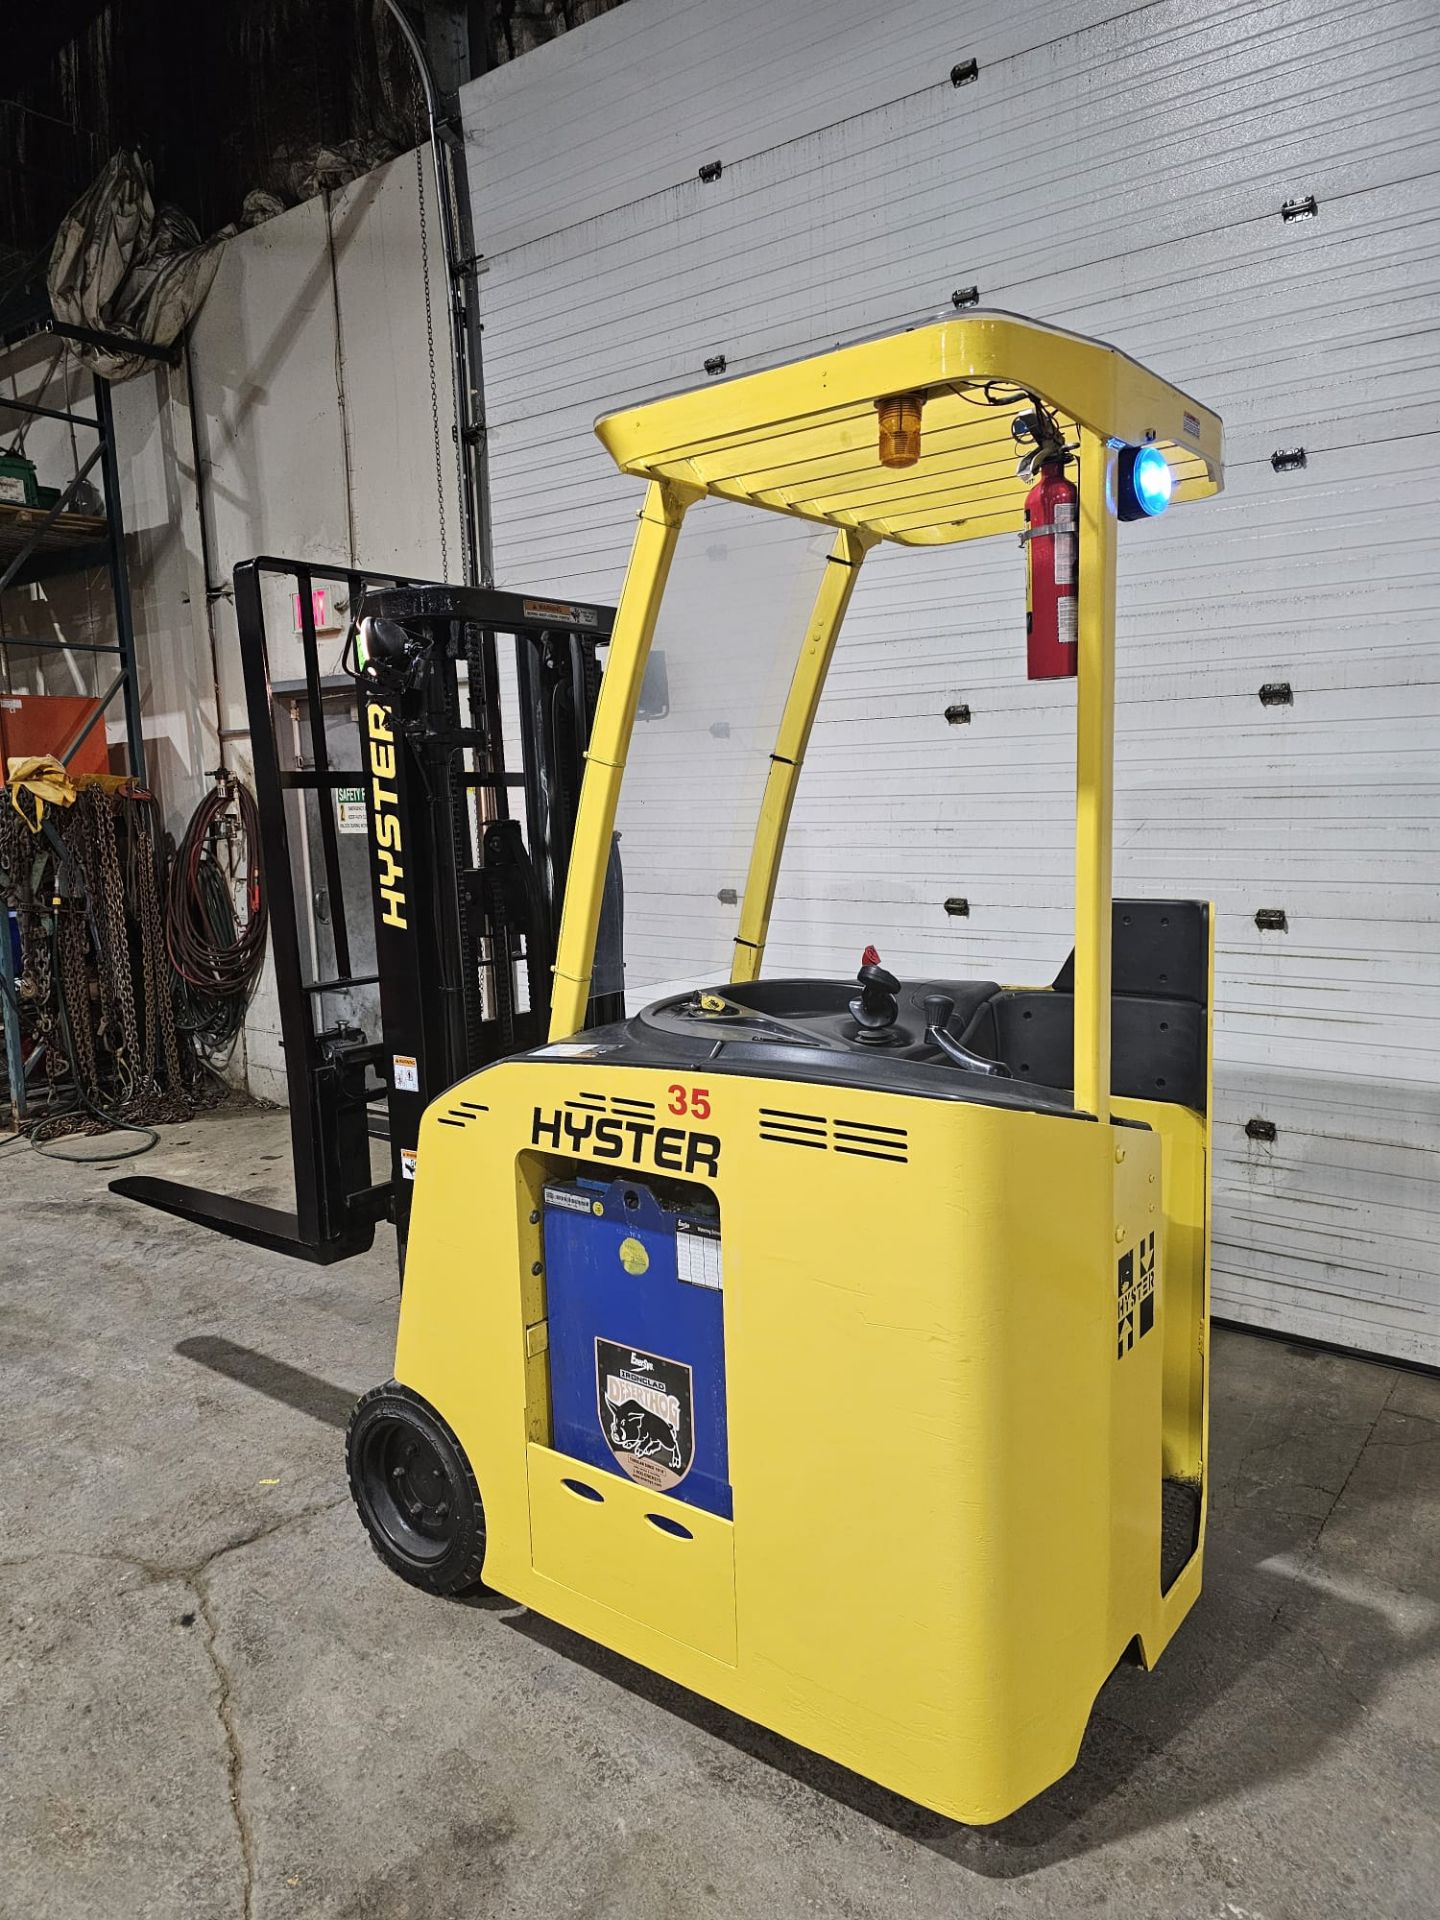 2006 Hyster 3,500lbs Capacity Electric Stand On Forklift 3-STAGE MAST 36V with sideshift & Tires - Image 3 of 8